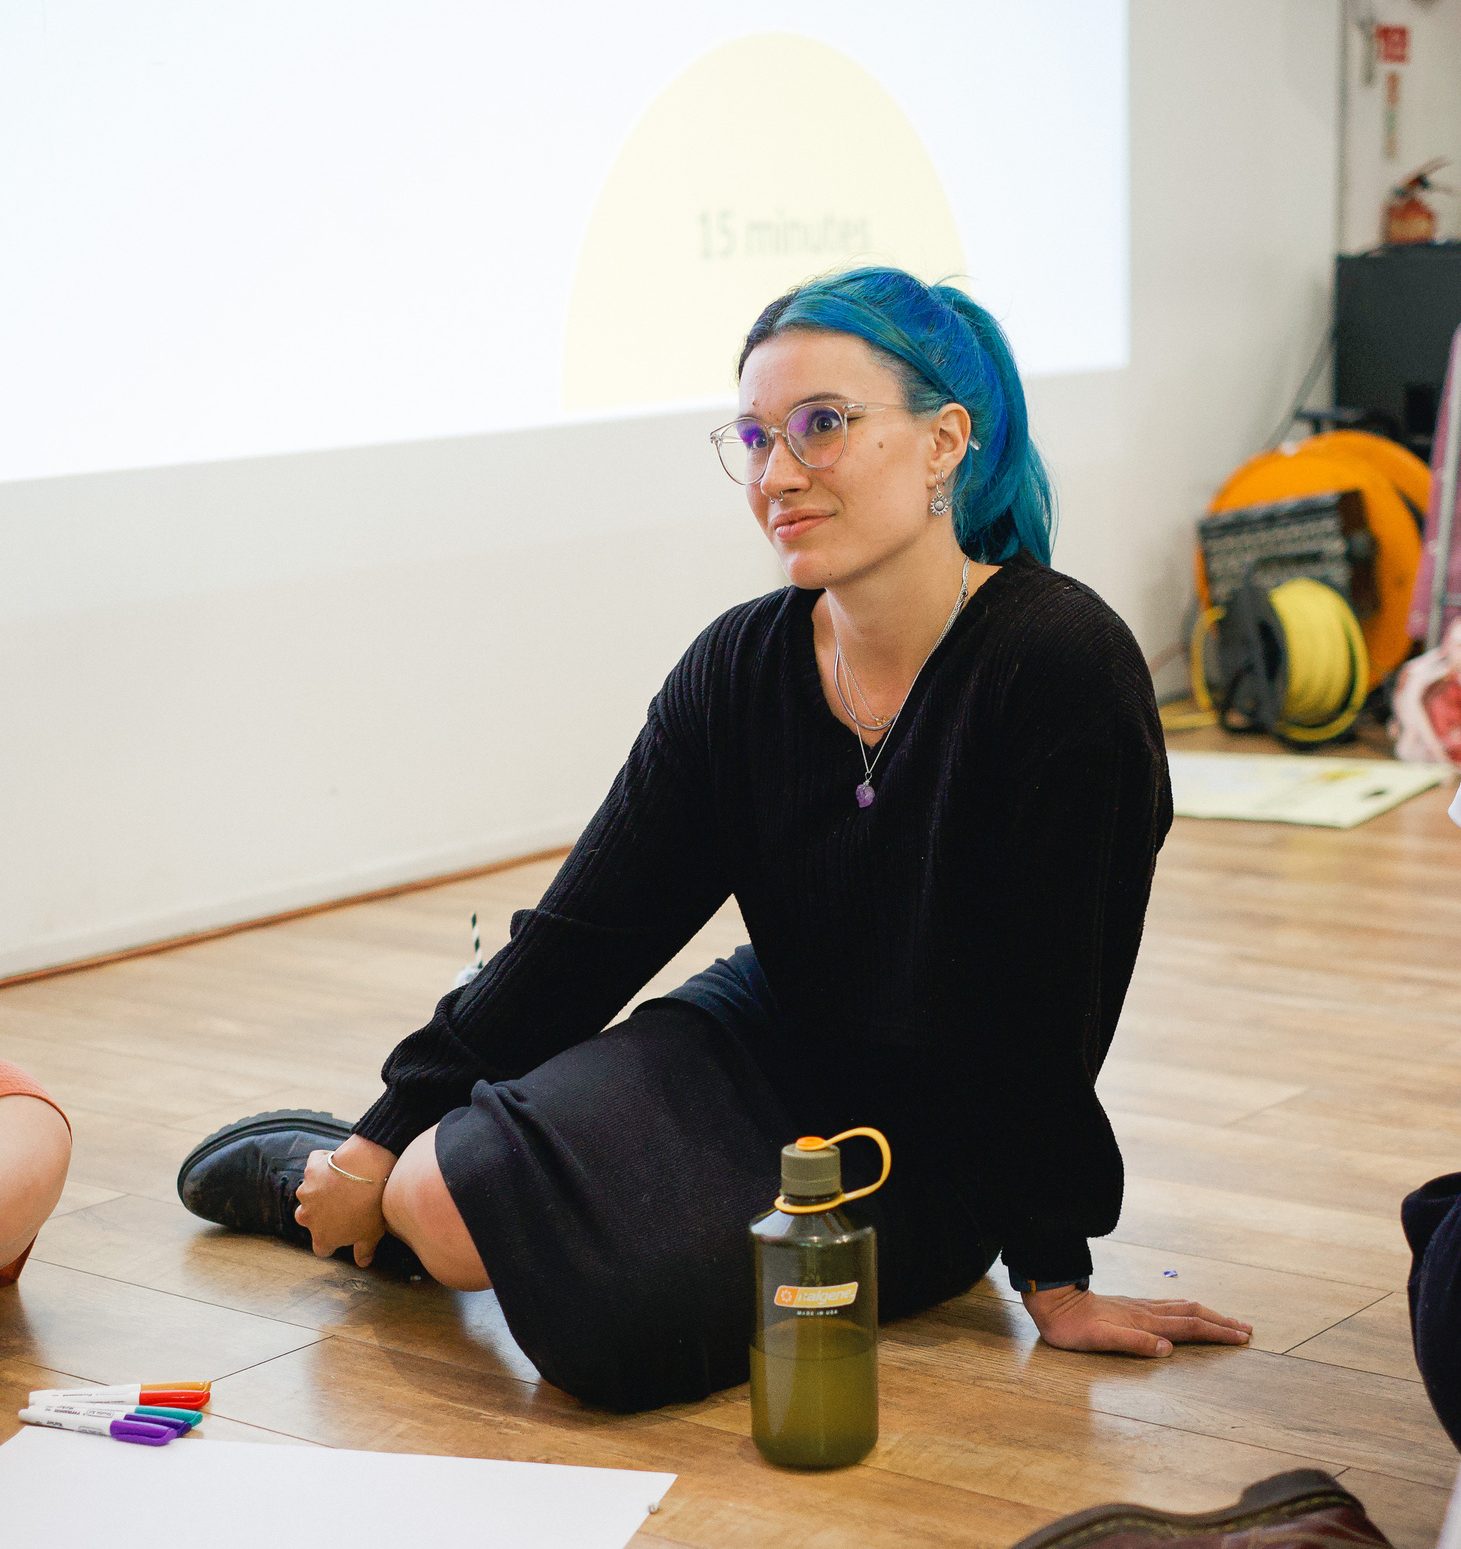 A white person sitting on the floor in a training session with glasses and black and blue hair.